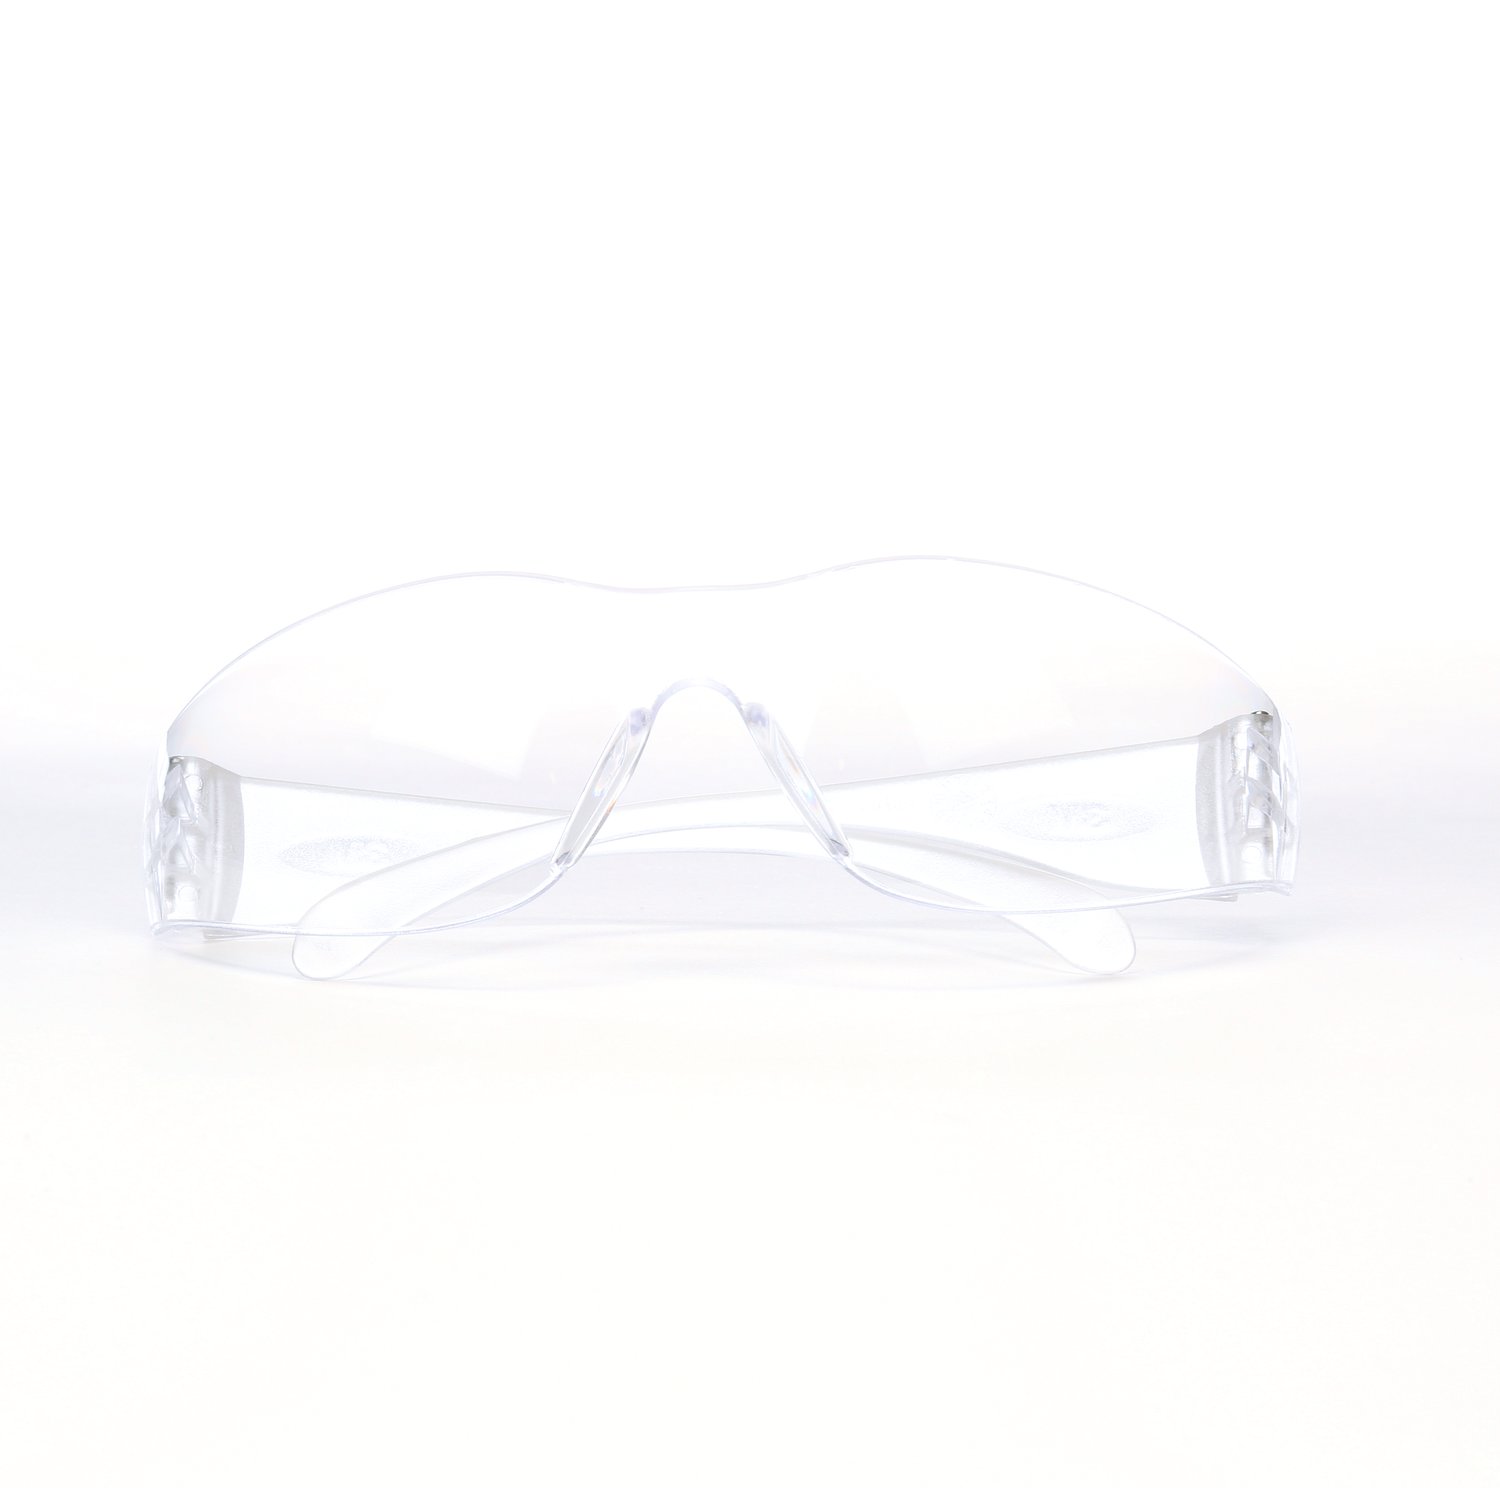 7100114652 - 3M Virtua Protective Eyewear 11228-00000-100 Clear Uncoated Lens,
Clear Temple 100 EA/Case